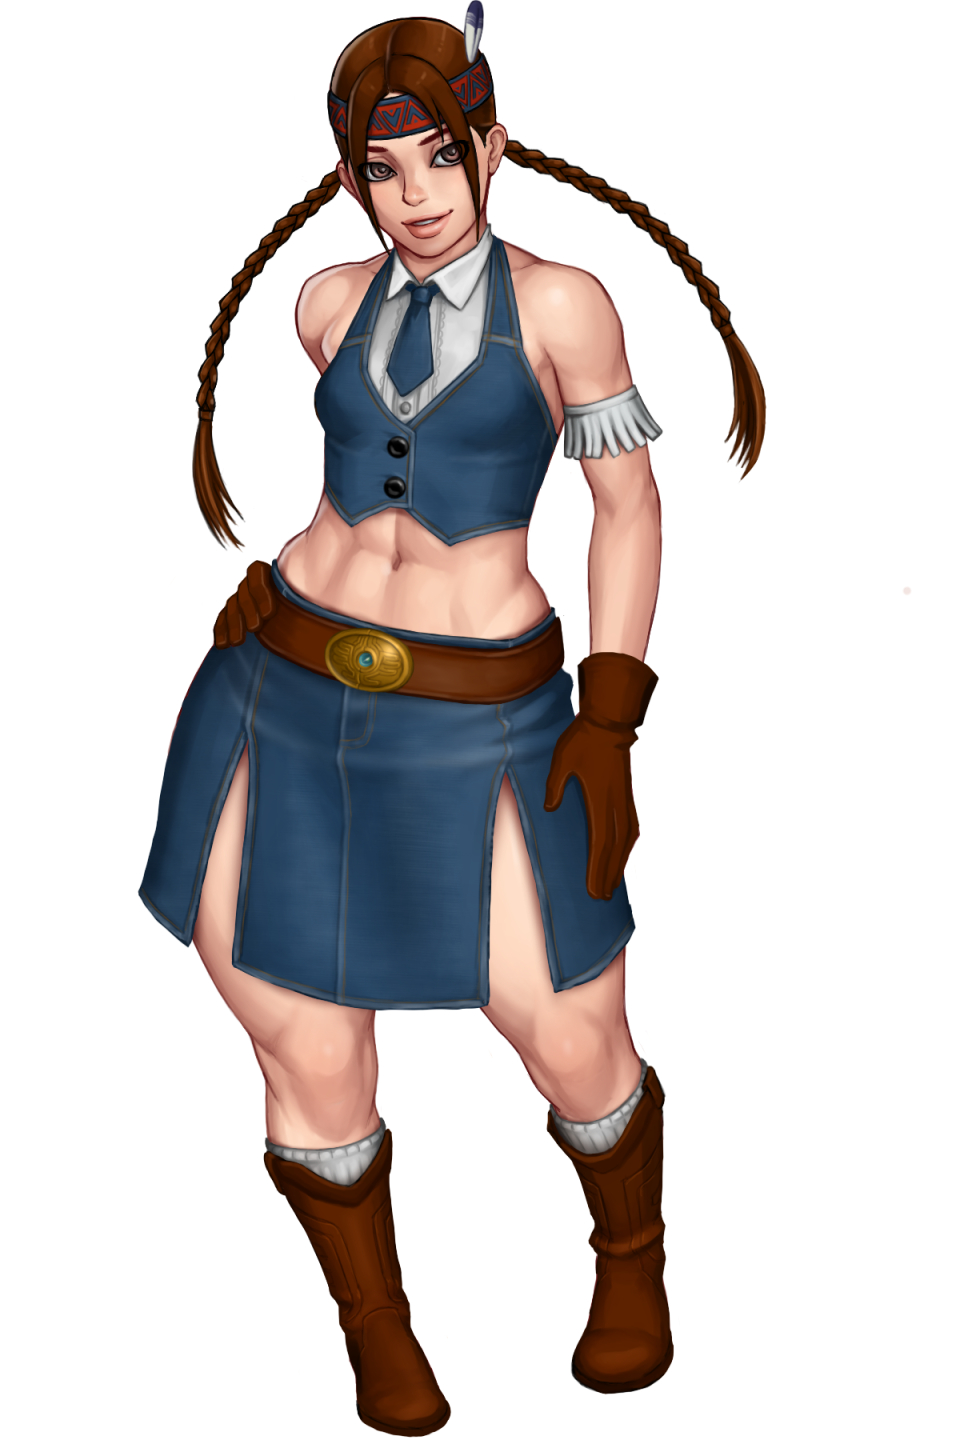 1girl abs bangs bare_shoulders belt belt_buckle boots braid breasts brown_eyes brown_gloves brown_hair buckle buttons commentary_request cowboy_boots crop_top denim denim_skirt denim_vest feathers full_body gem gloves hair_feathers hanakuso_hojiri_mashin hand_on_hip headband headdress highres julia_chang leather leather_gloves lips long_hair long_skirt midriff native_american native_american_headdress navel necktie nose parted_bangs shirt side_slit skirt sleeveless sleeveless_shirt small_breasts smile socks solo tekken toned twin_braids vest white_background wide_hips